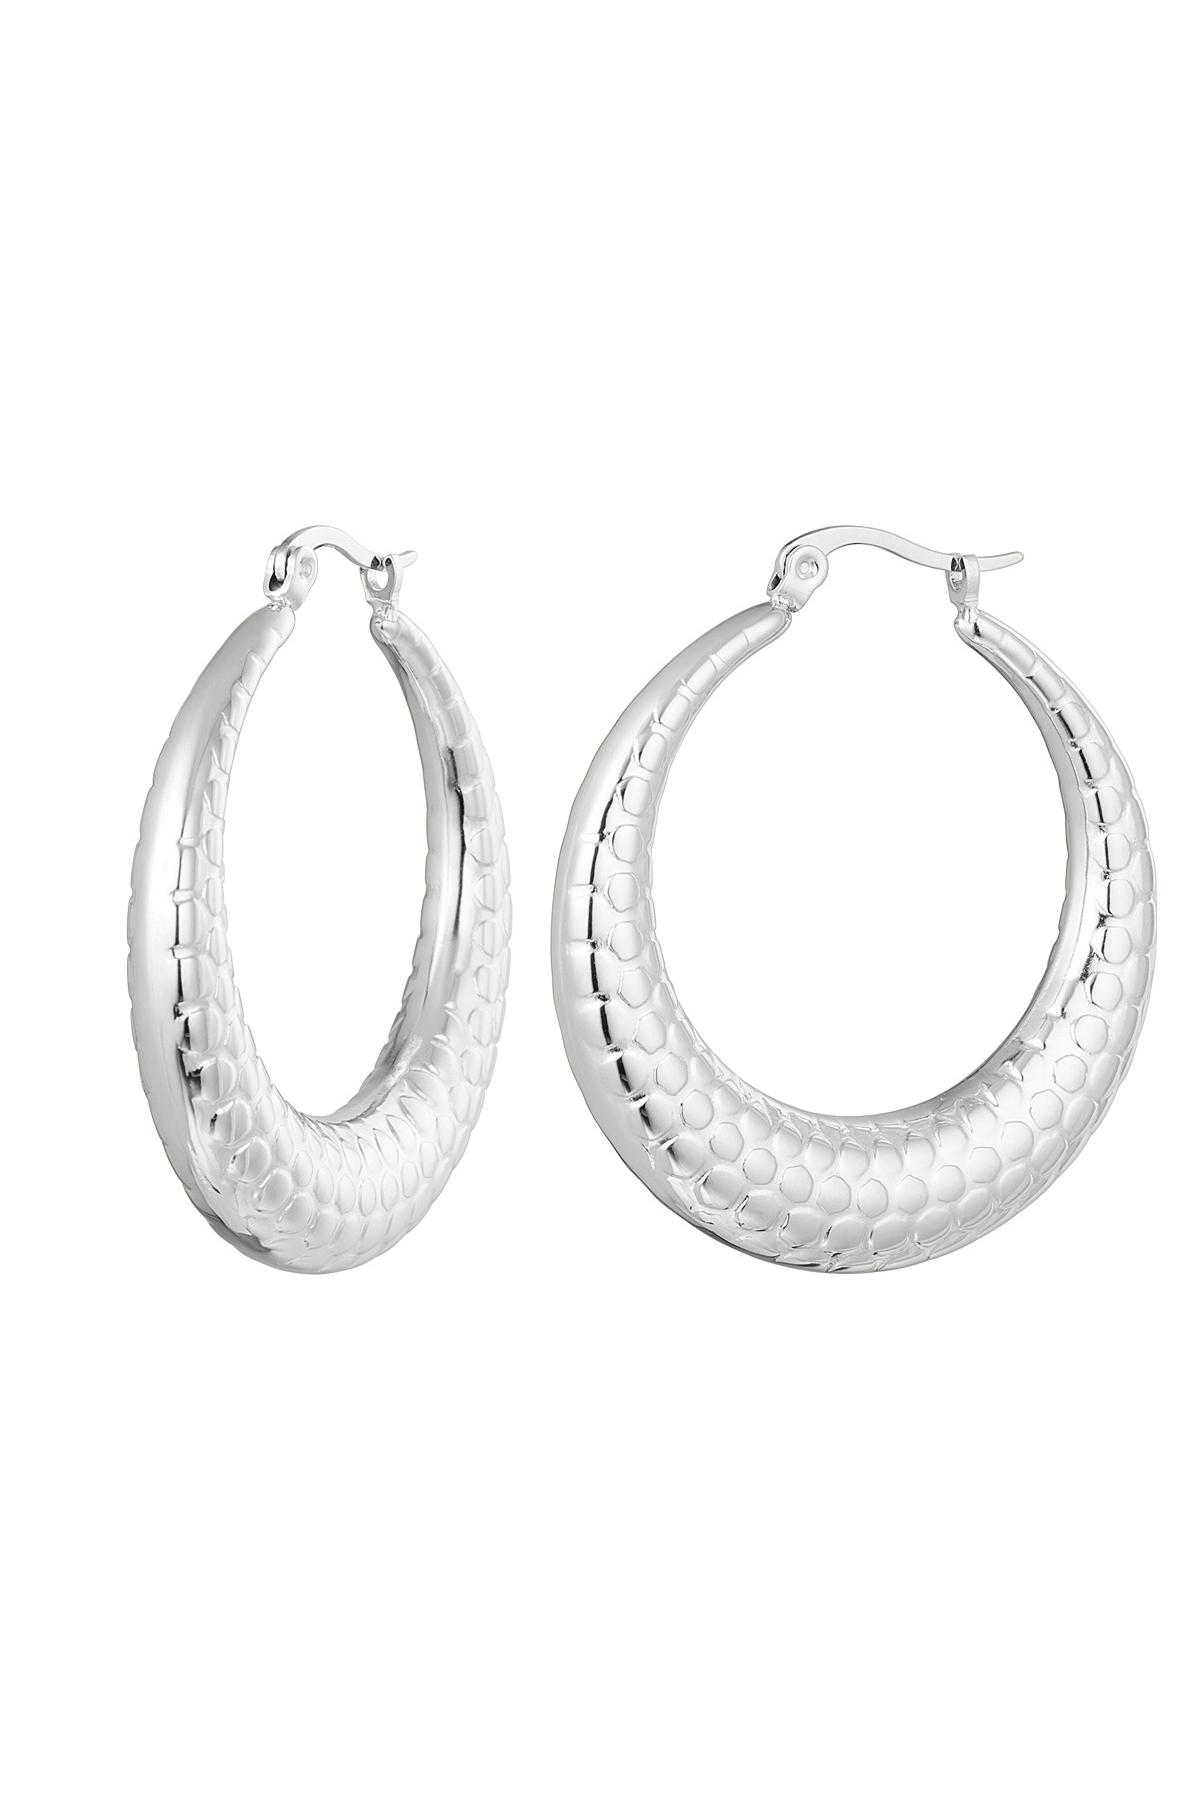 Earrings bubble print large Silver Stainless Steel h5 